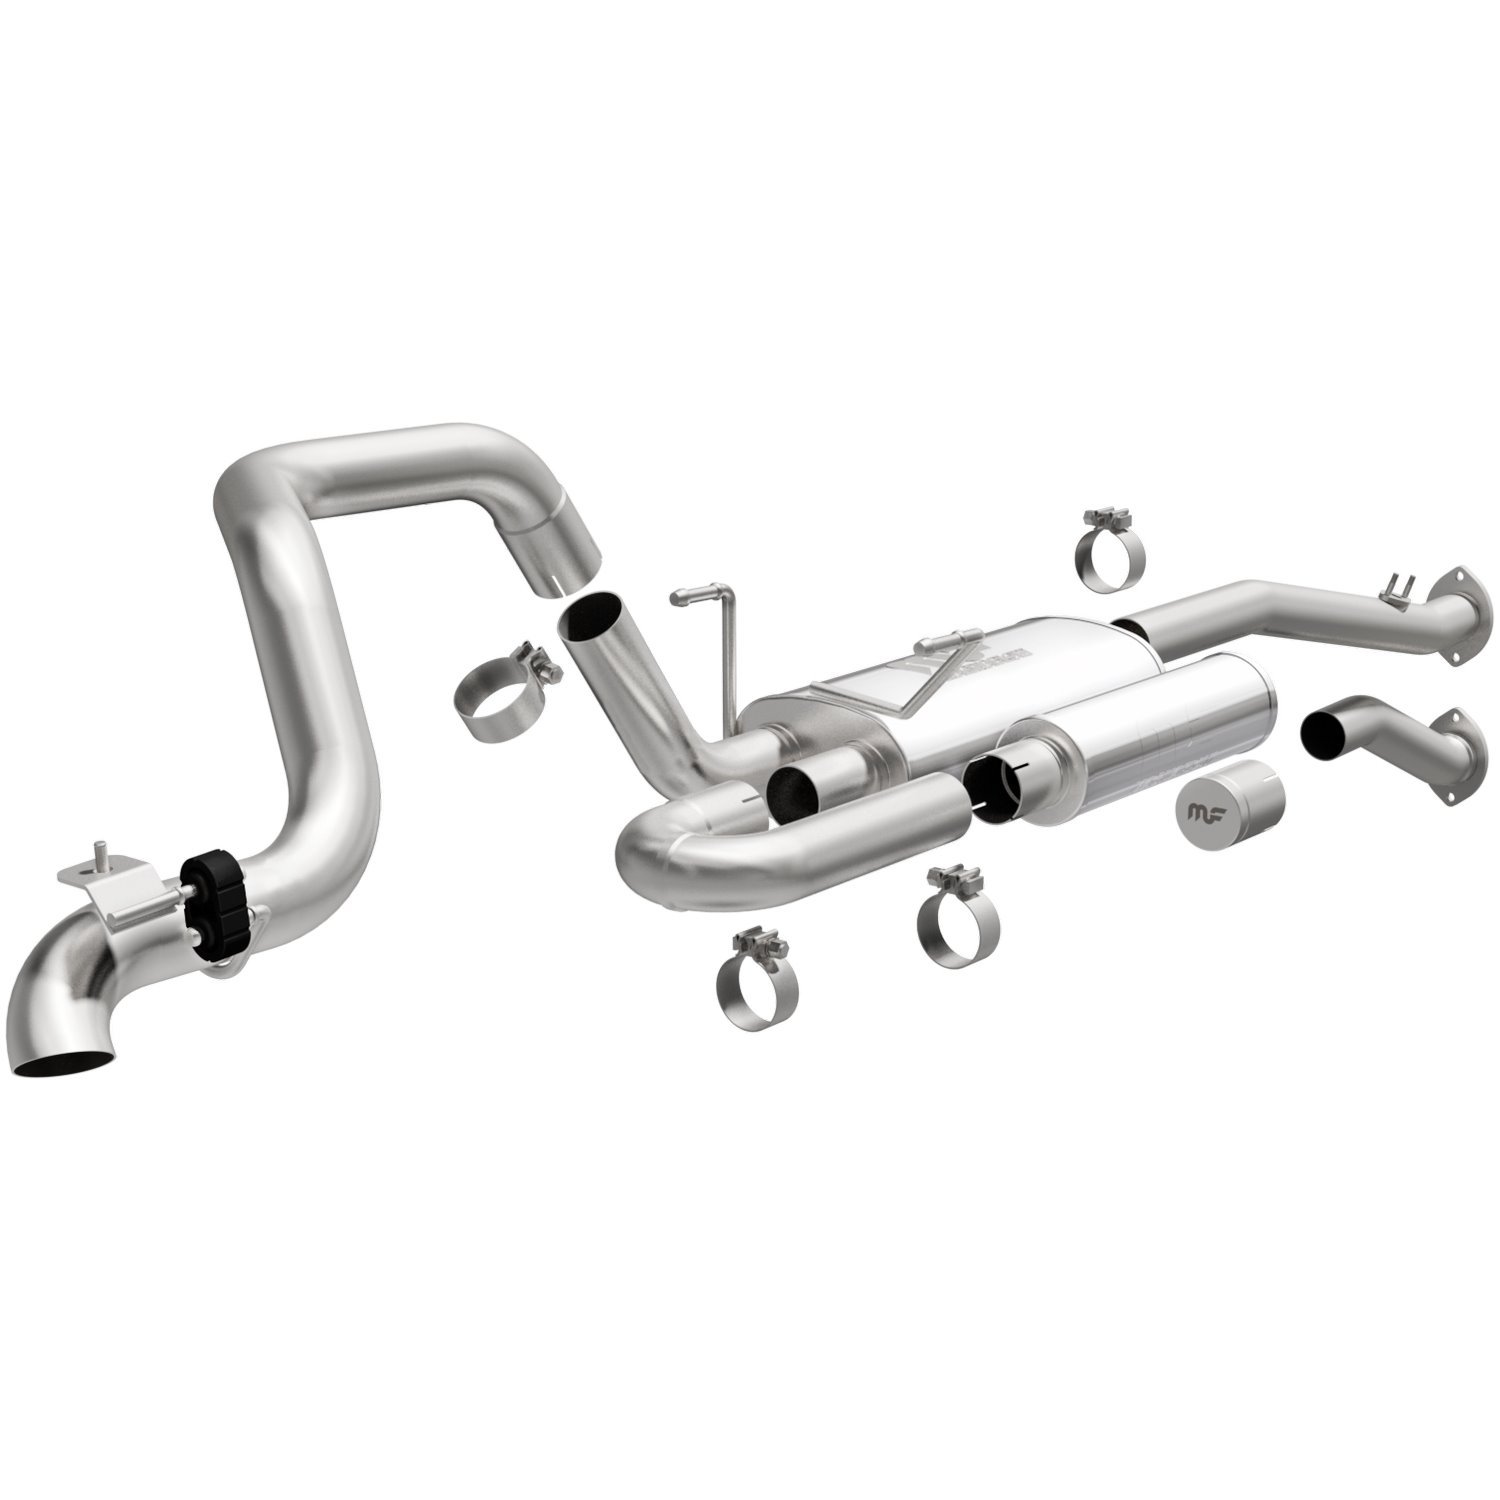 19538 Overland Series Cat-Back Exhaust System fits 1996-2002 Toyota 4Runner 3.4L V6